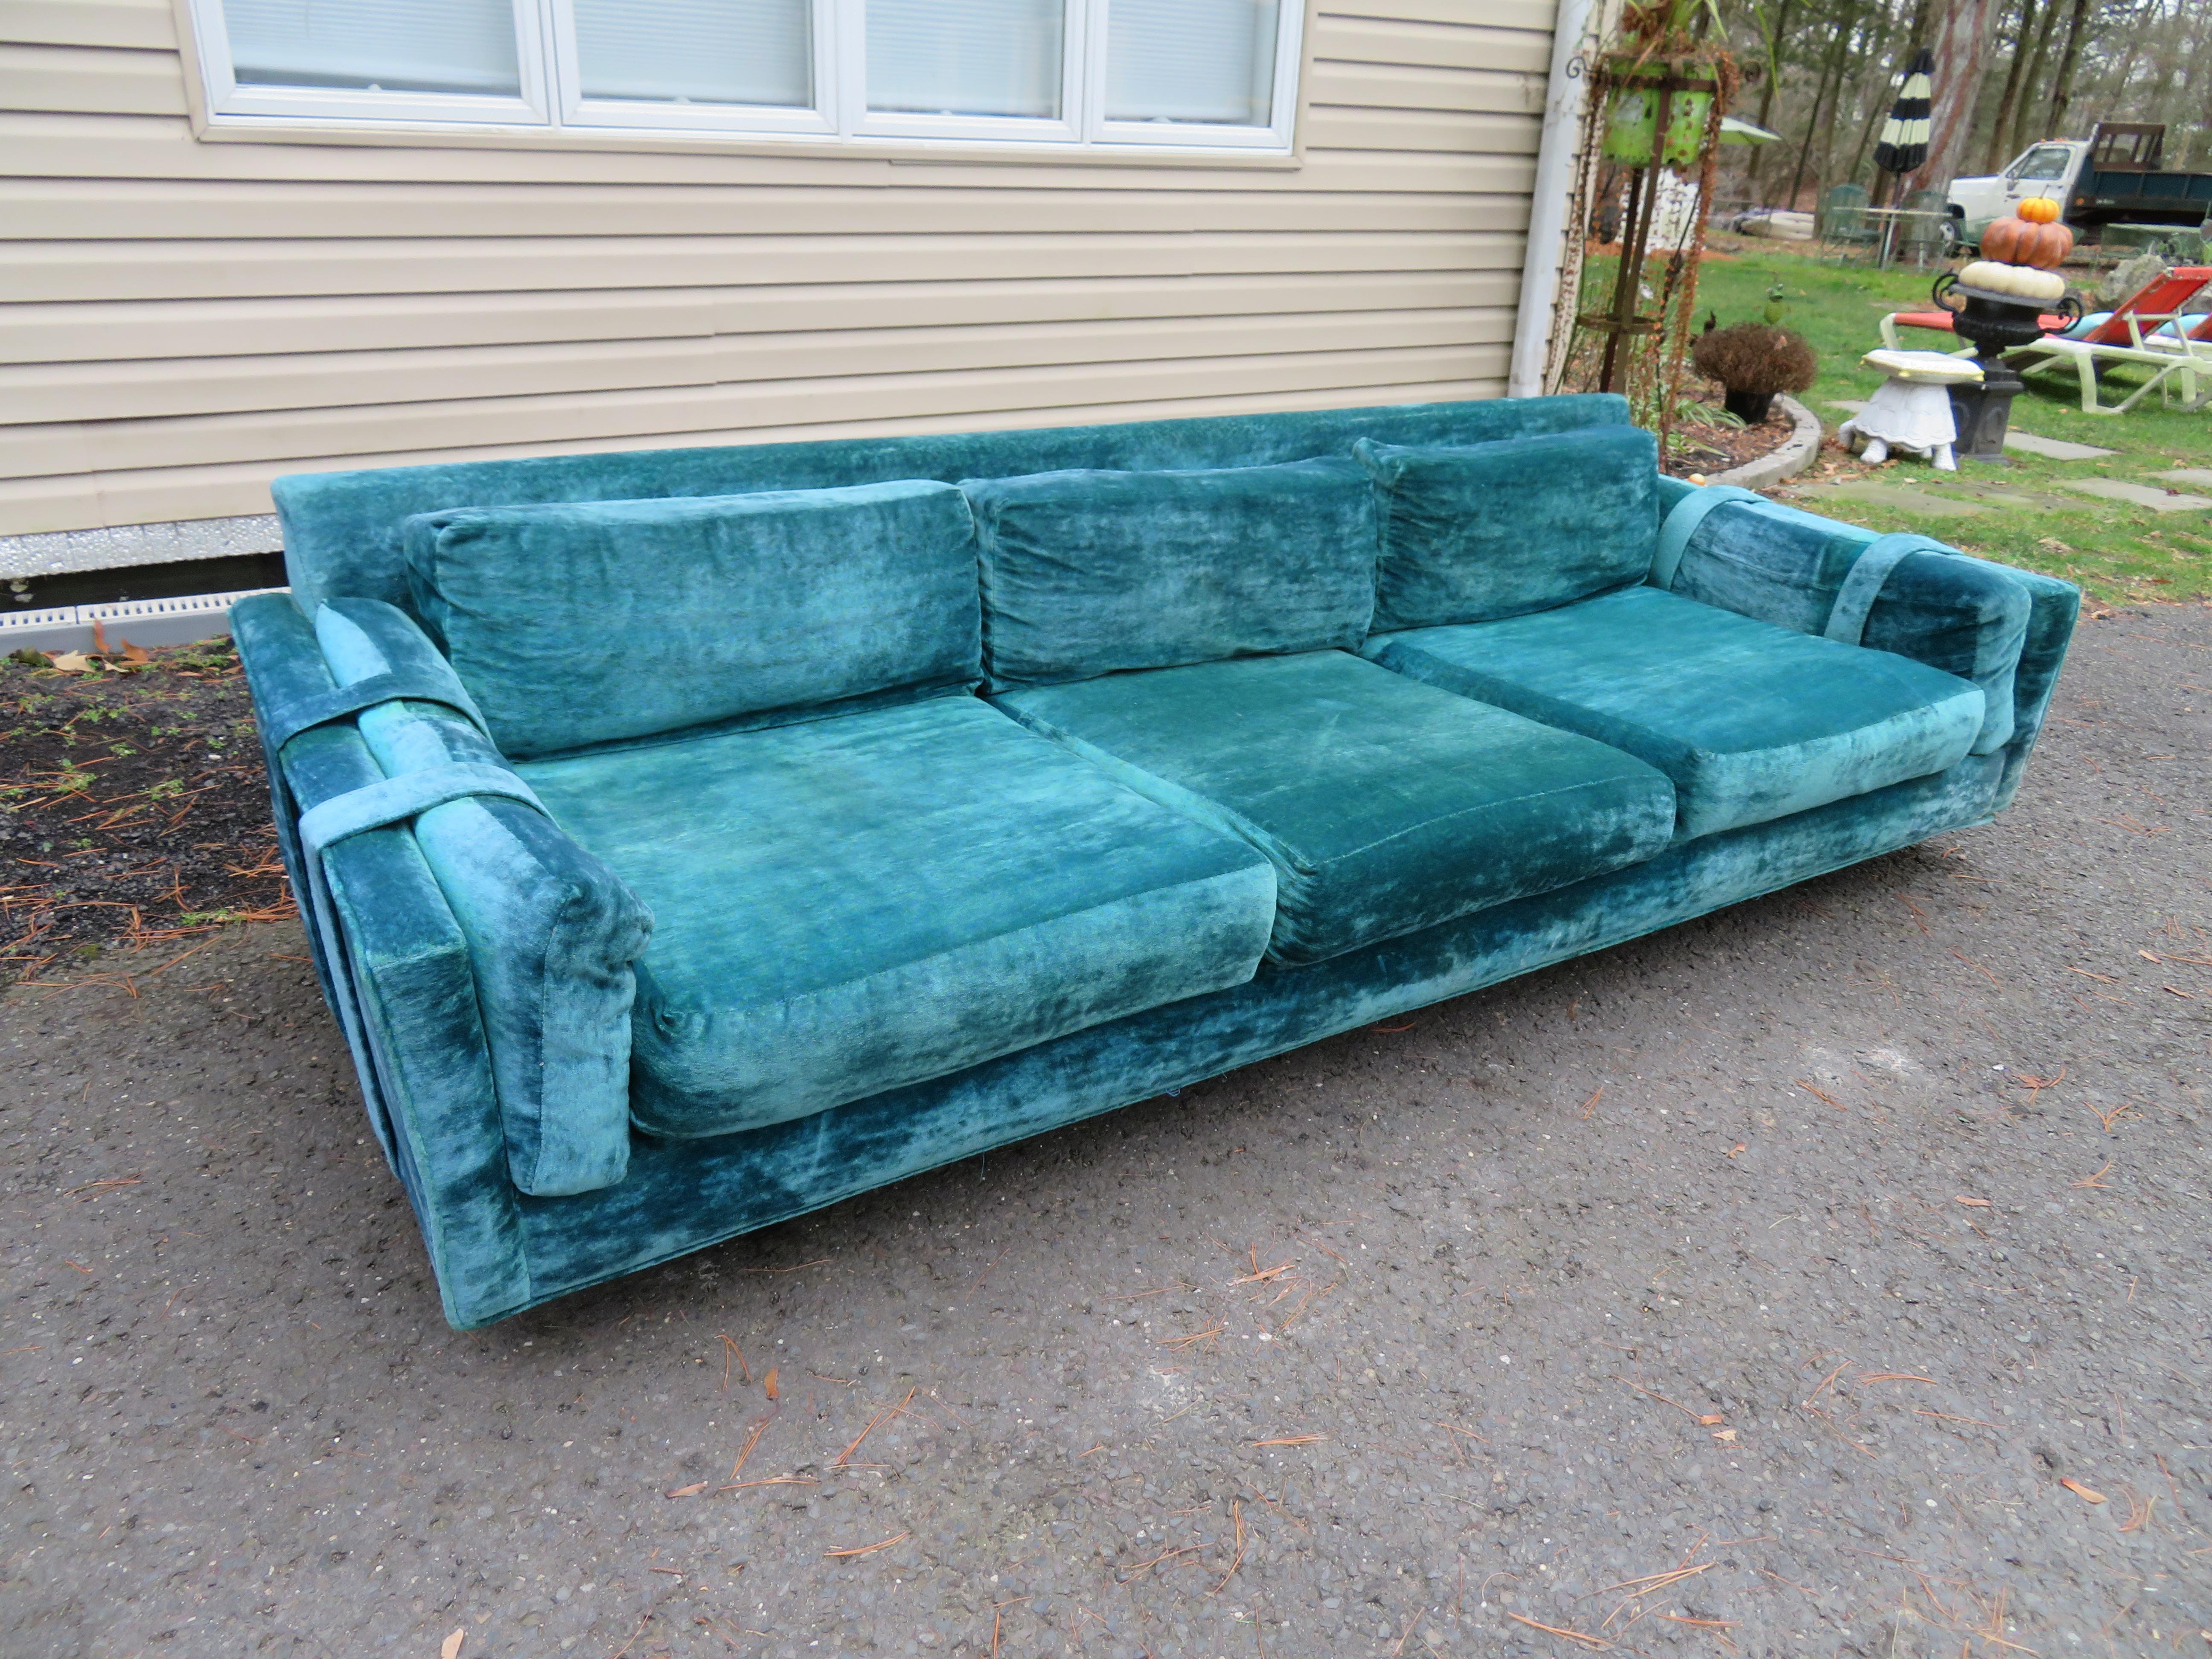 Handsome Milo Baughman style low profile velvet sofa on a plinth base. The turquoise crushed velvet is original and still has some life left in it! If your looking for a very comfortable vintage look, this sofa is for you. The original fabric does